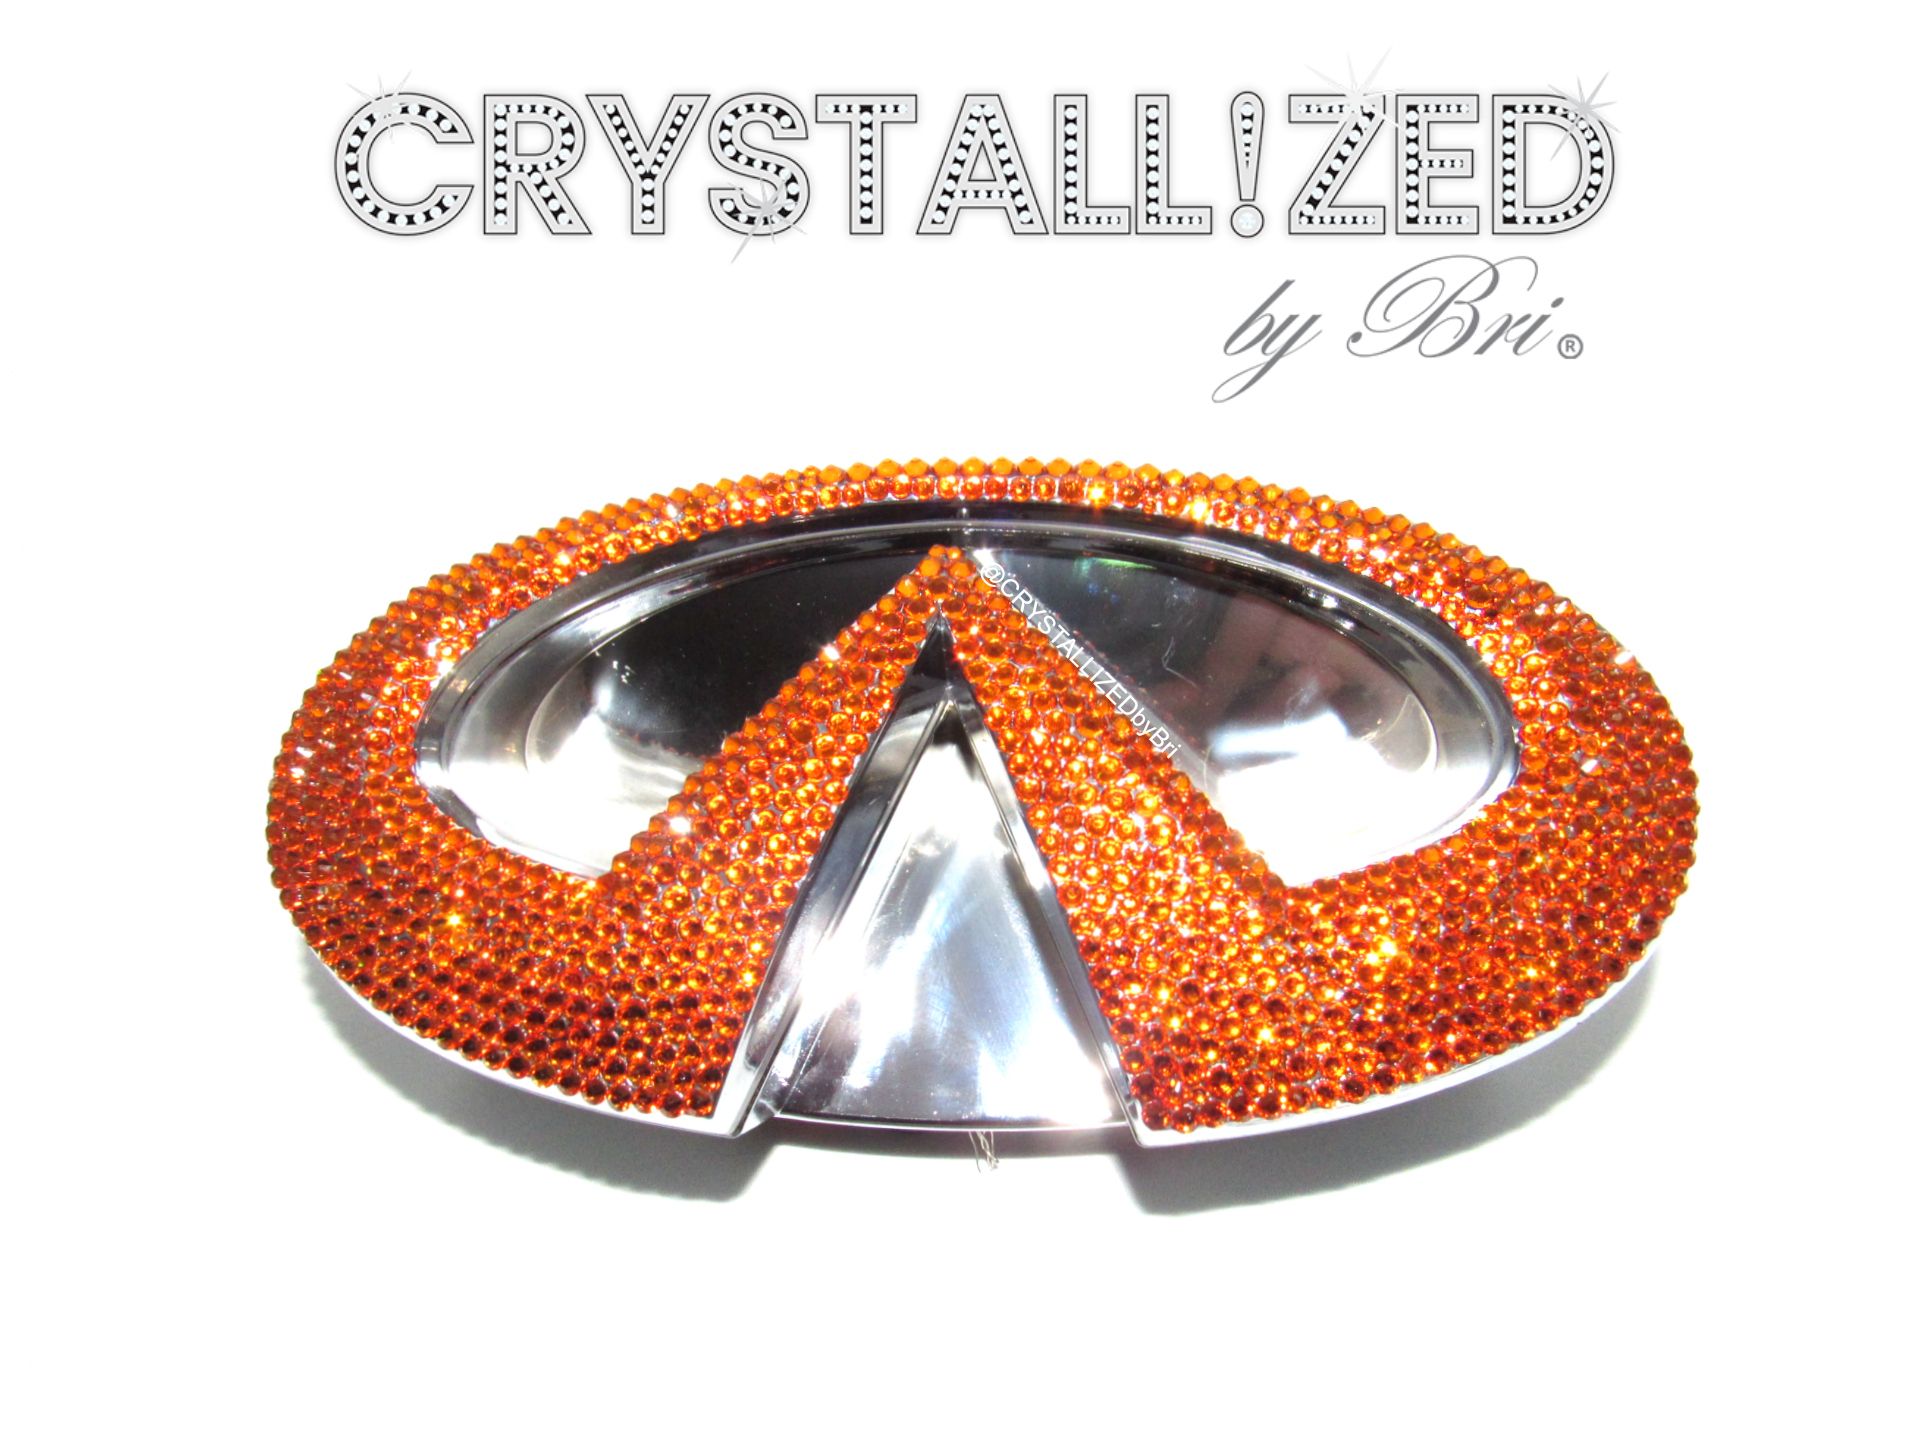 Buy Custom Infiniti Crystallized Car Emblem Bling Genuine European Crystals  Bedazzled, made to order from CRYSTALL!ZED by Bri, LLC